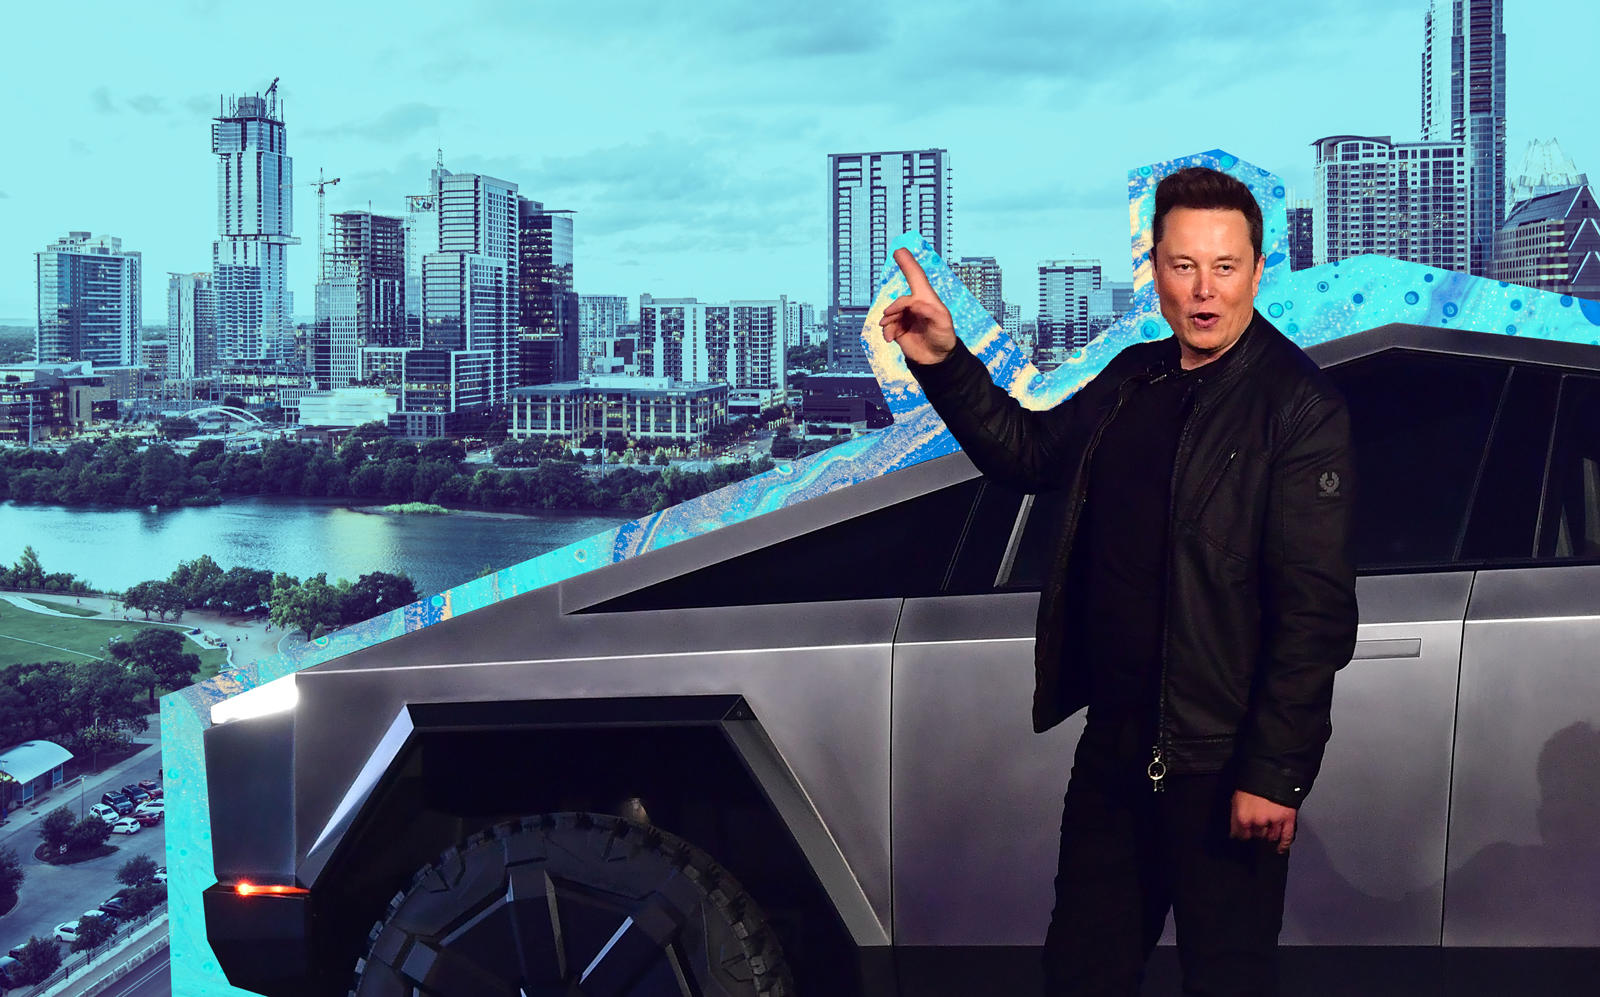 Elon Musk and the Cybertruck with Austin, Texas (Getty)